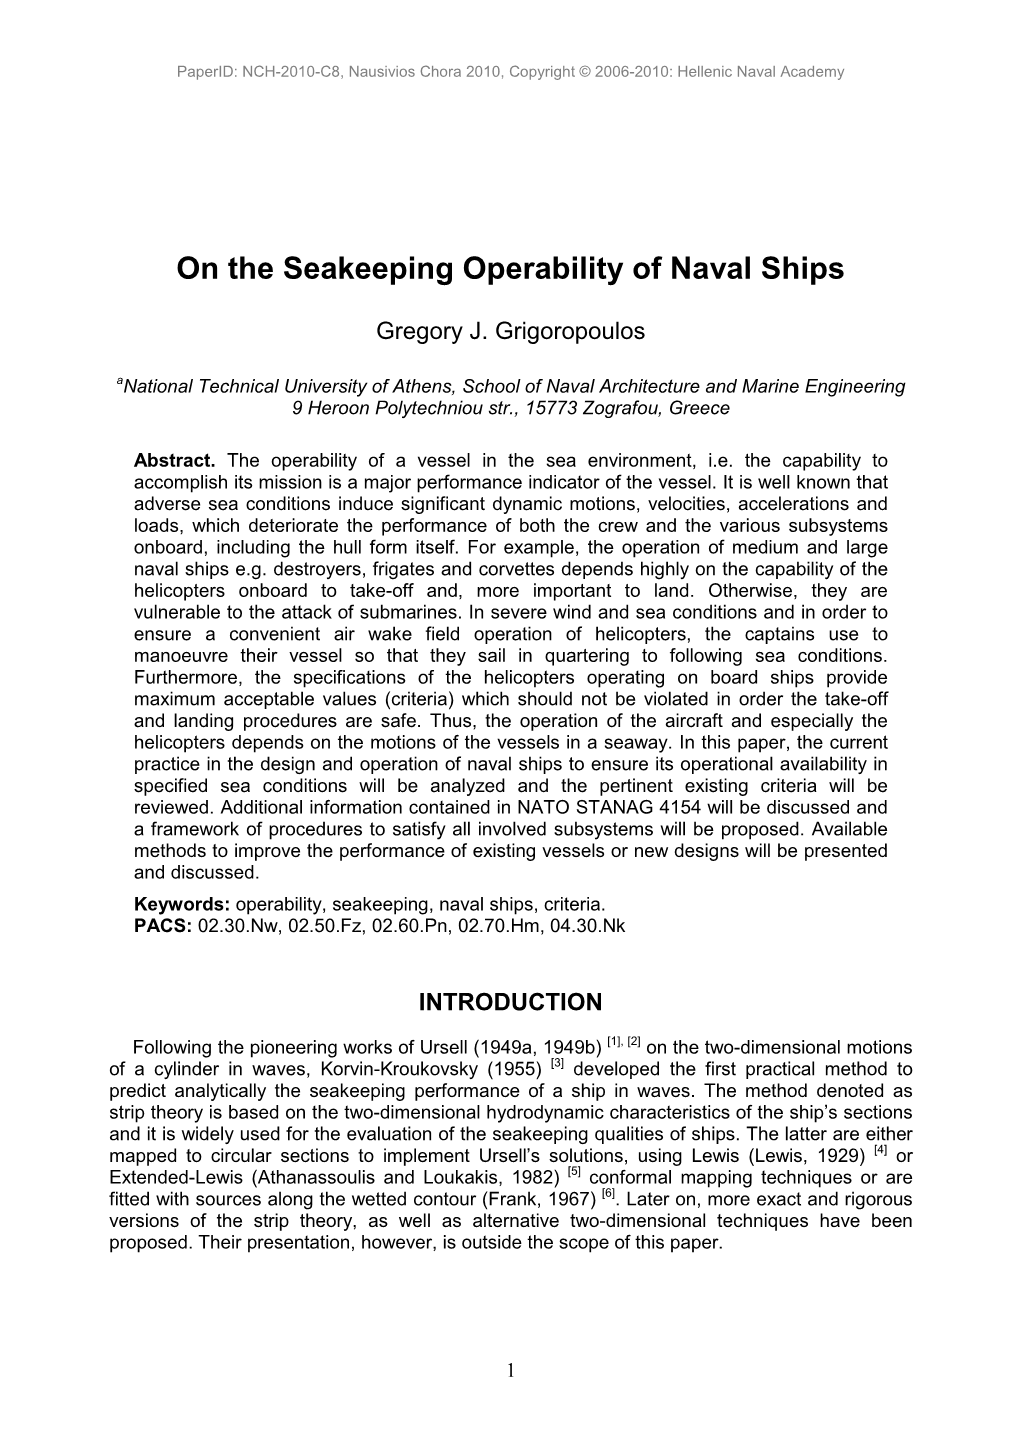 On the Seakeeping Operability of Naval Ships